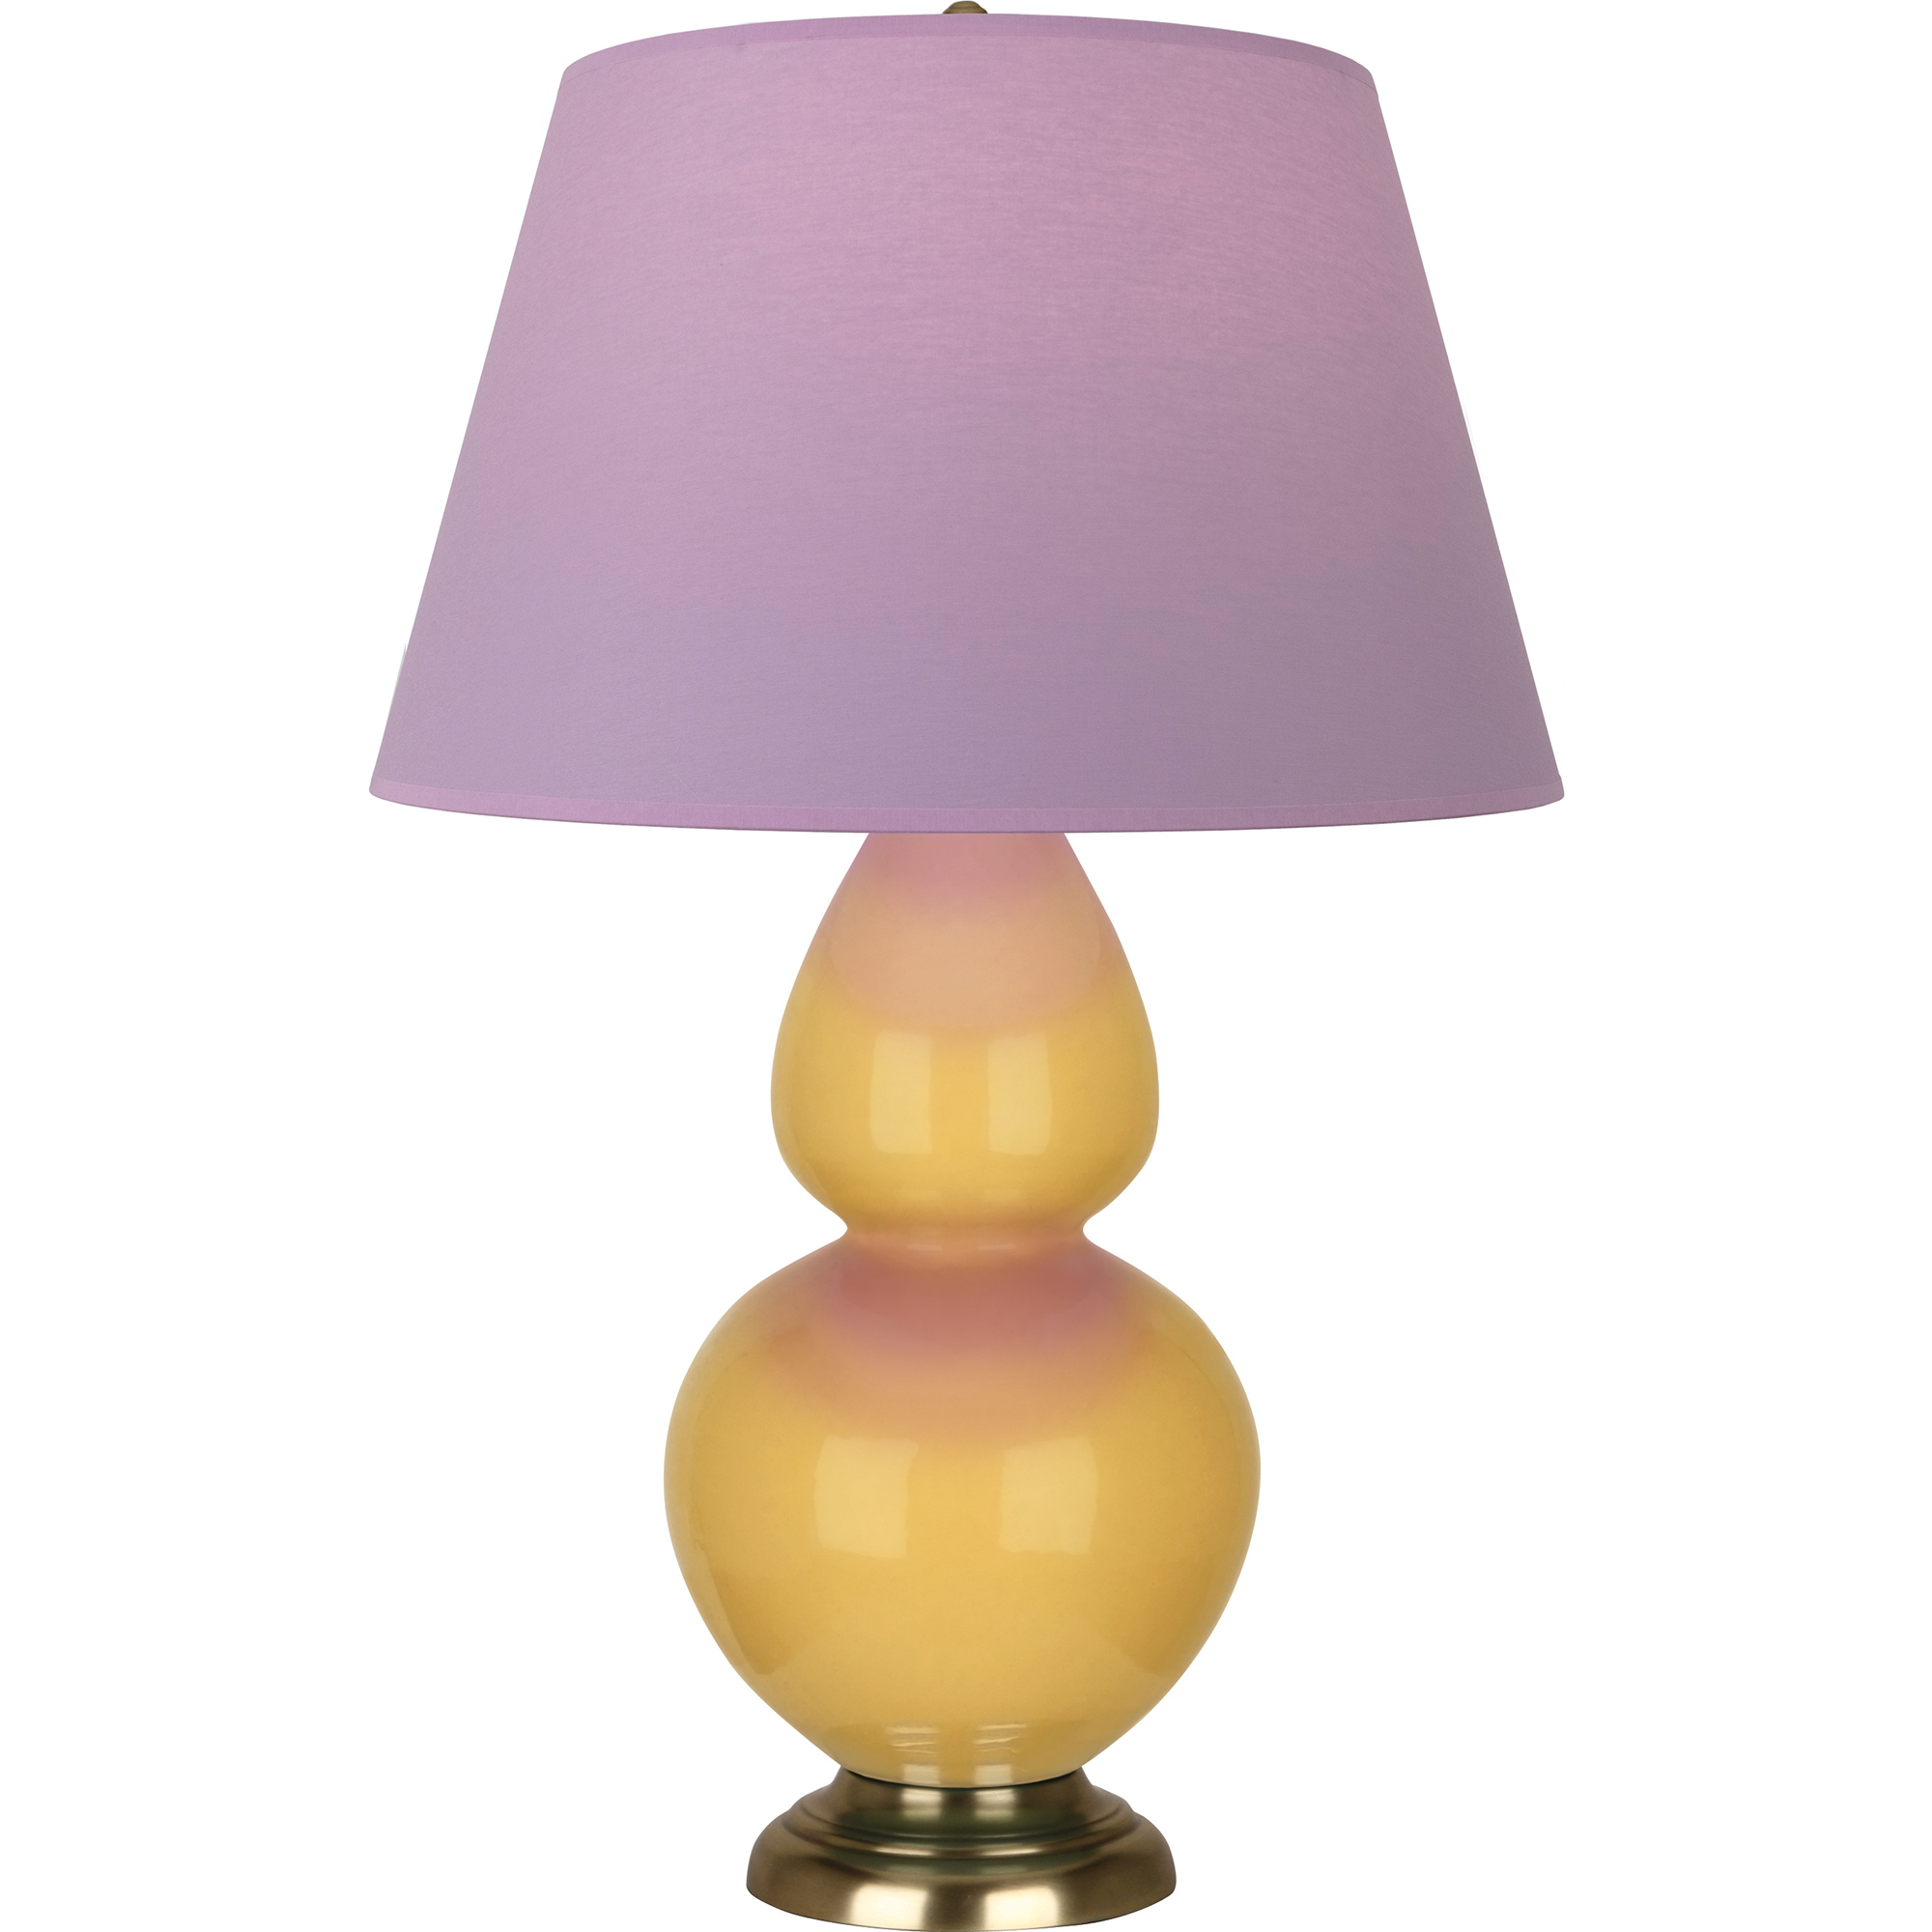 Double Gourd Table Lamp Style #SU20L